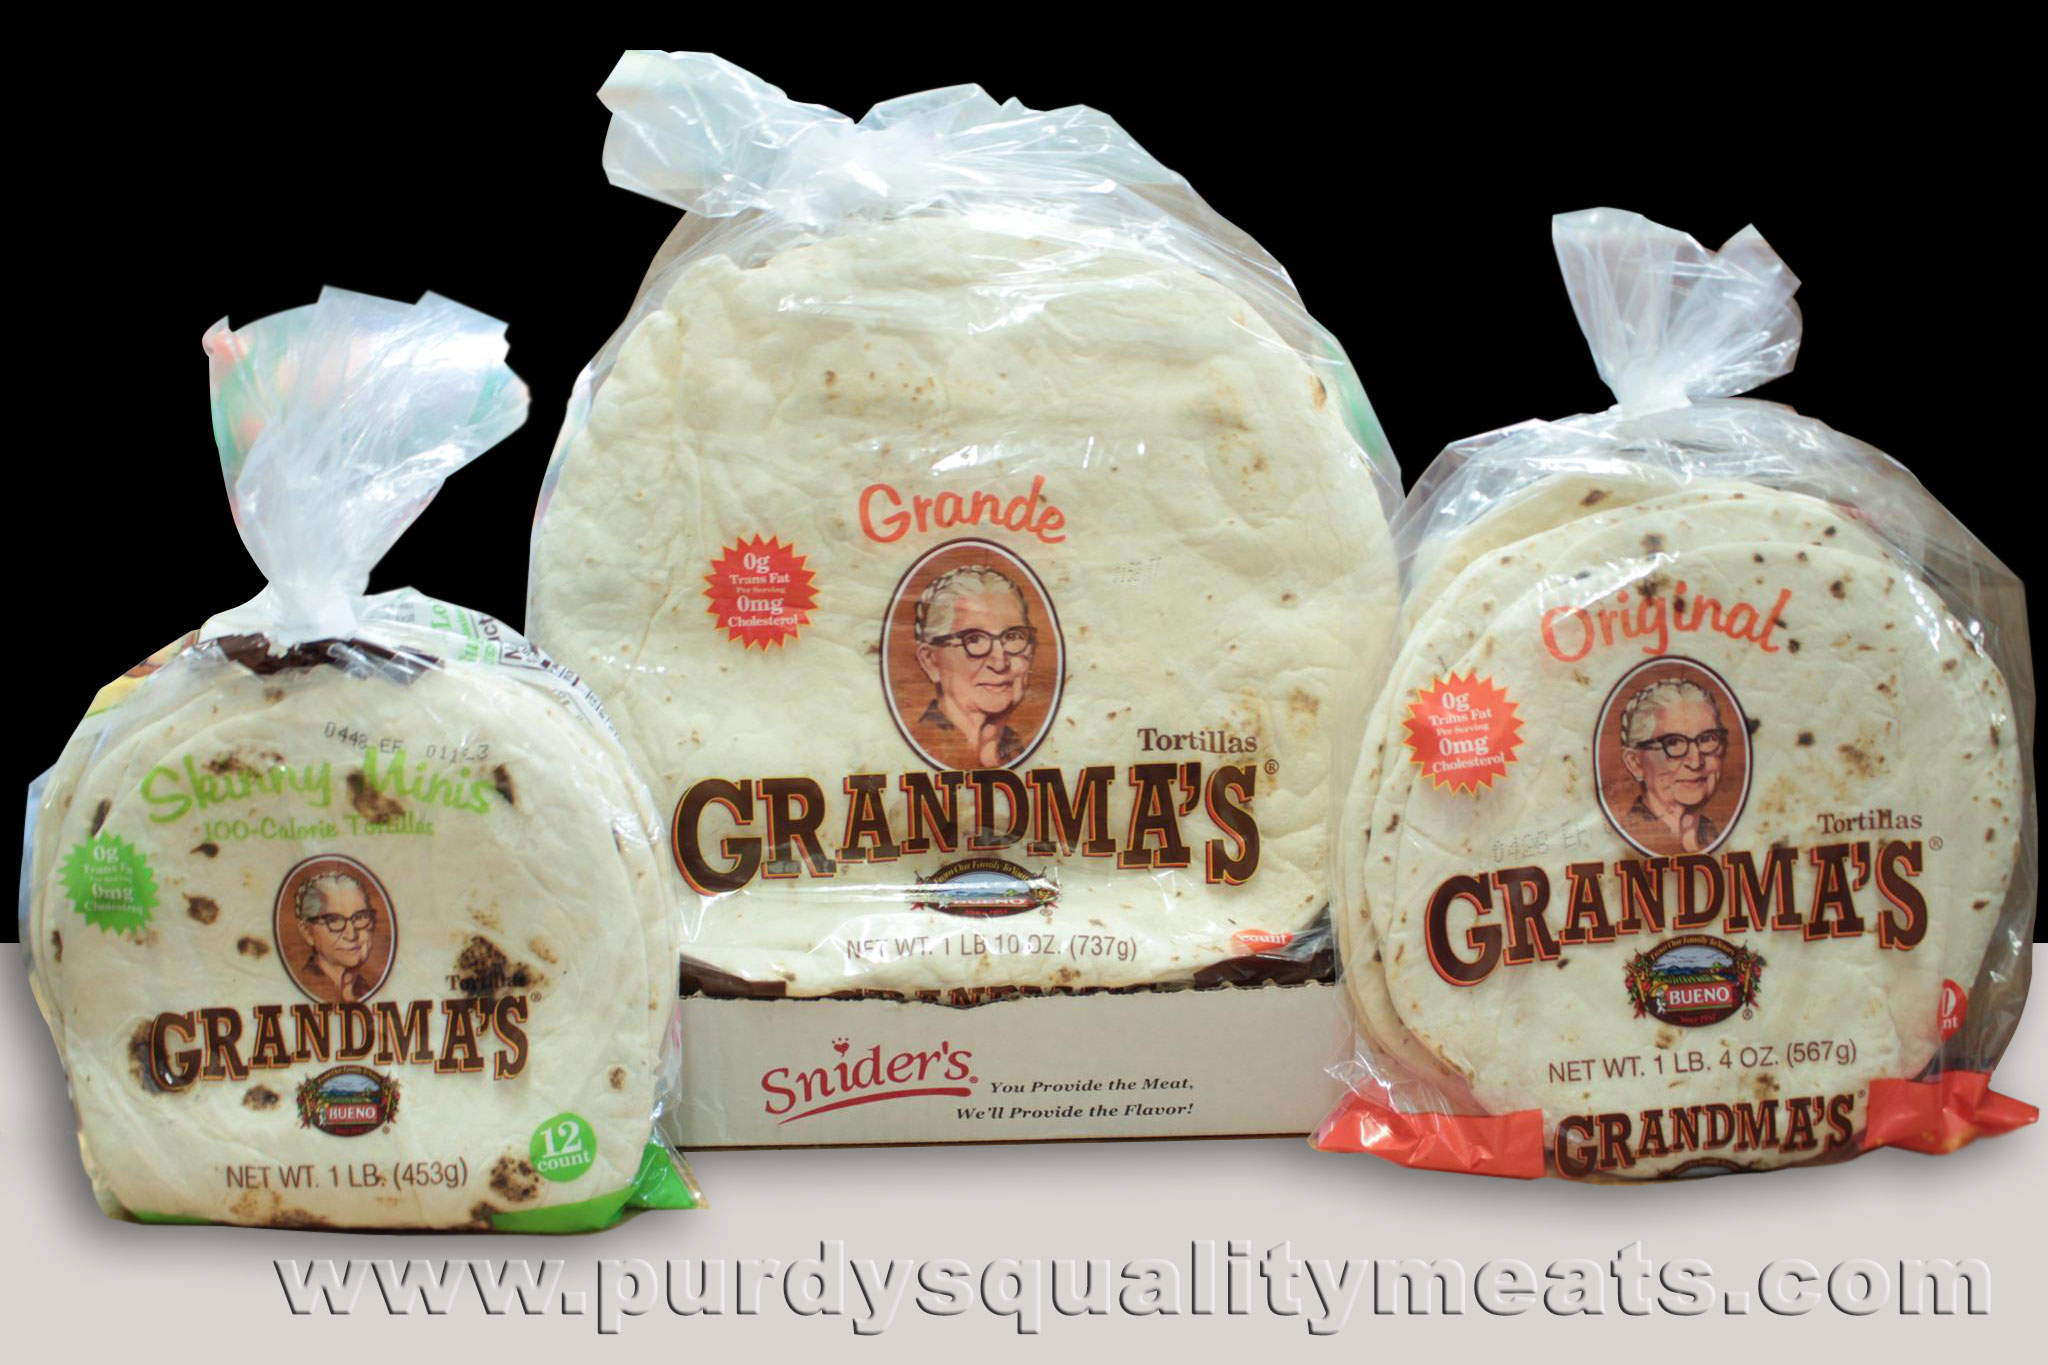 This image icon displays the Purdy's Quality Meats Grandma's Flour Tortillas image